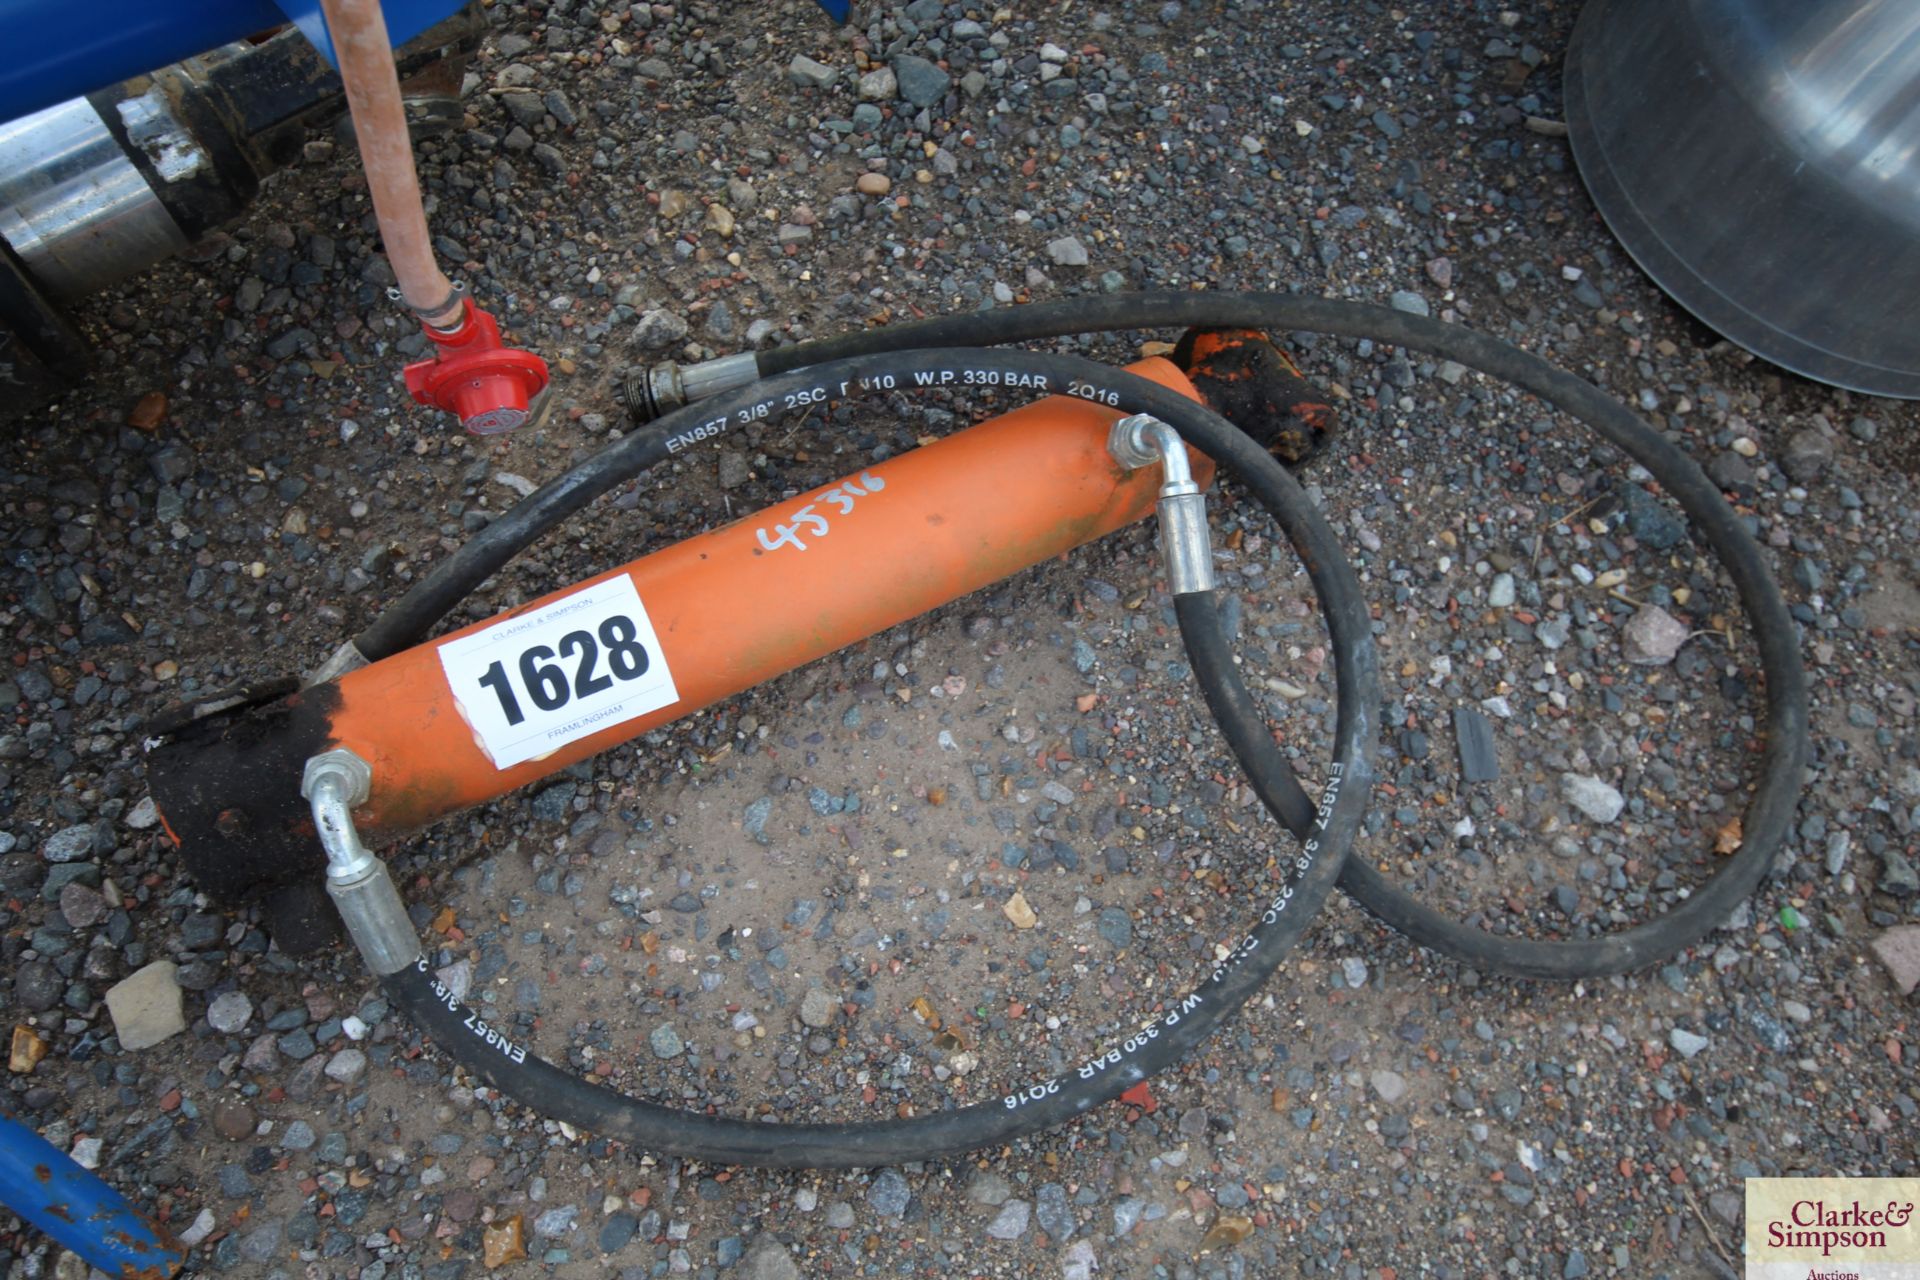 Hydraulic ram. For sale due to sale of farm. V